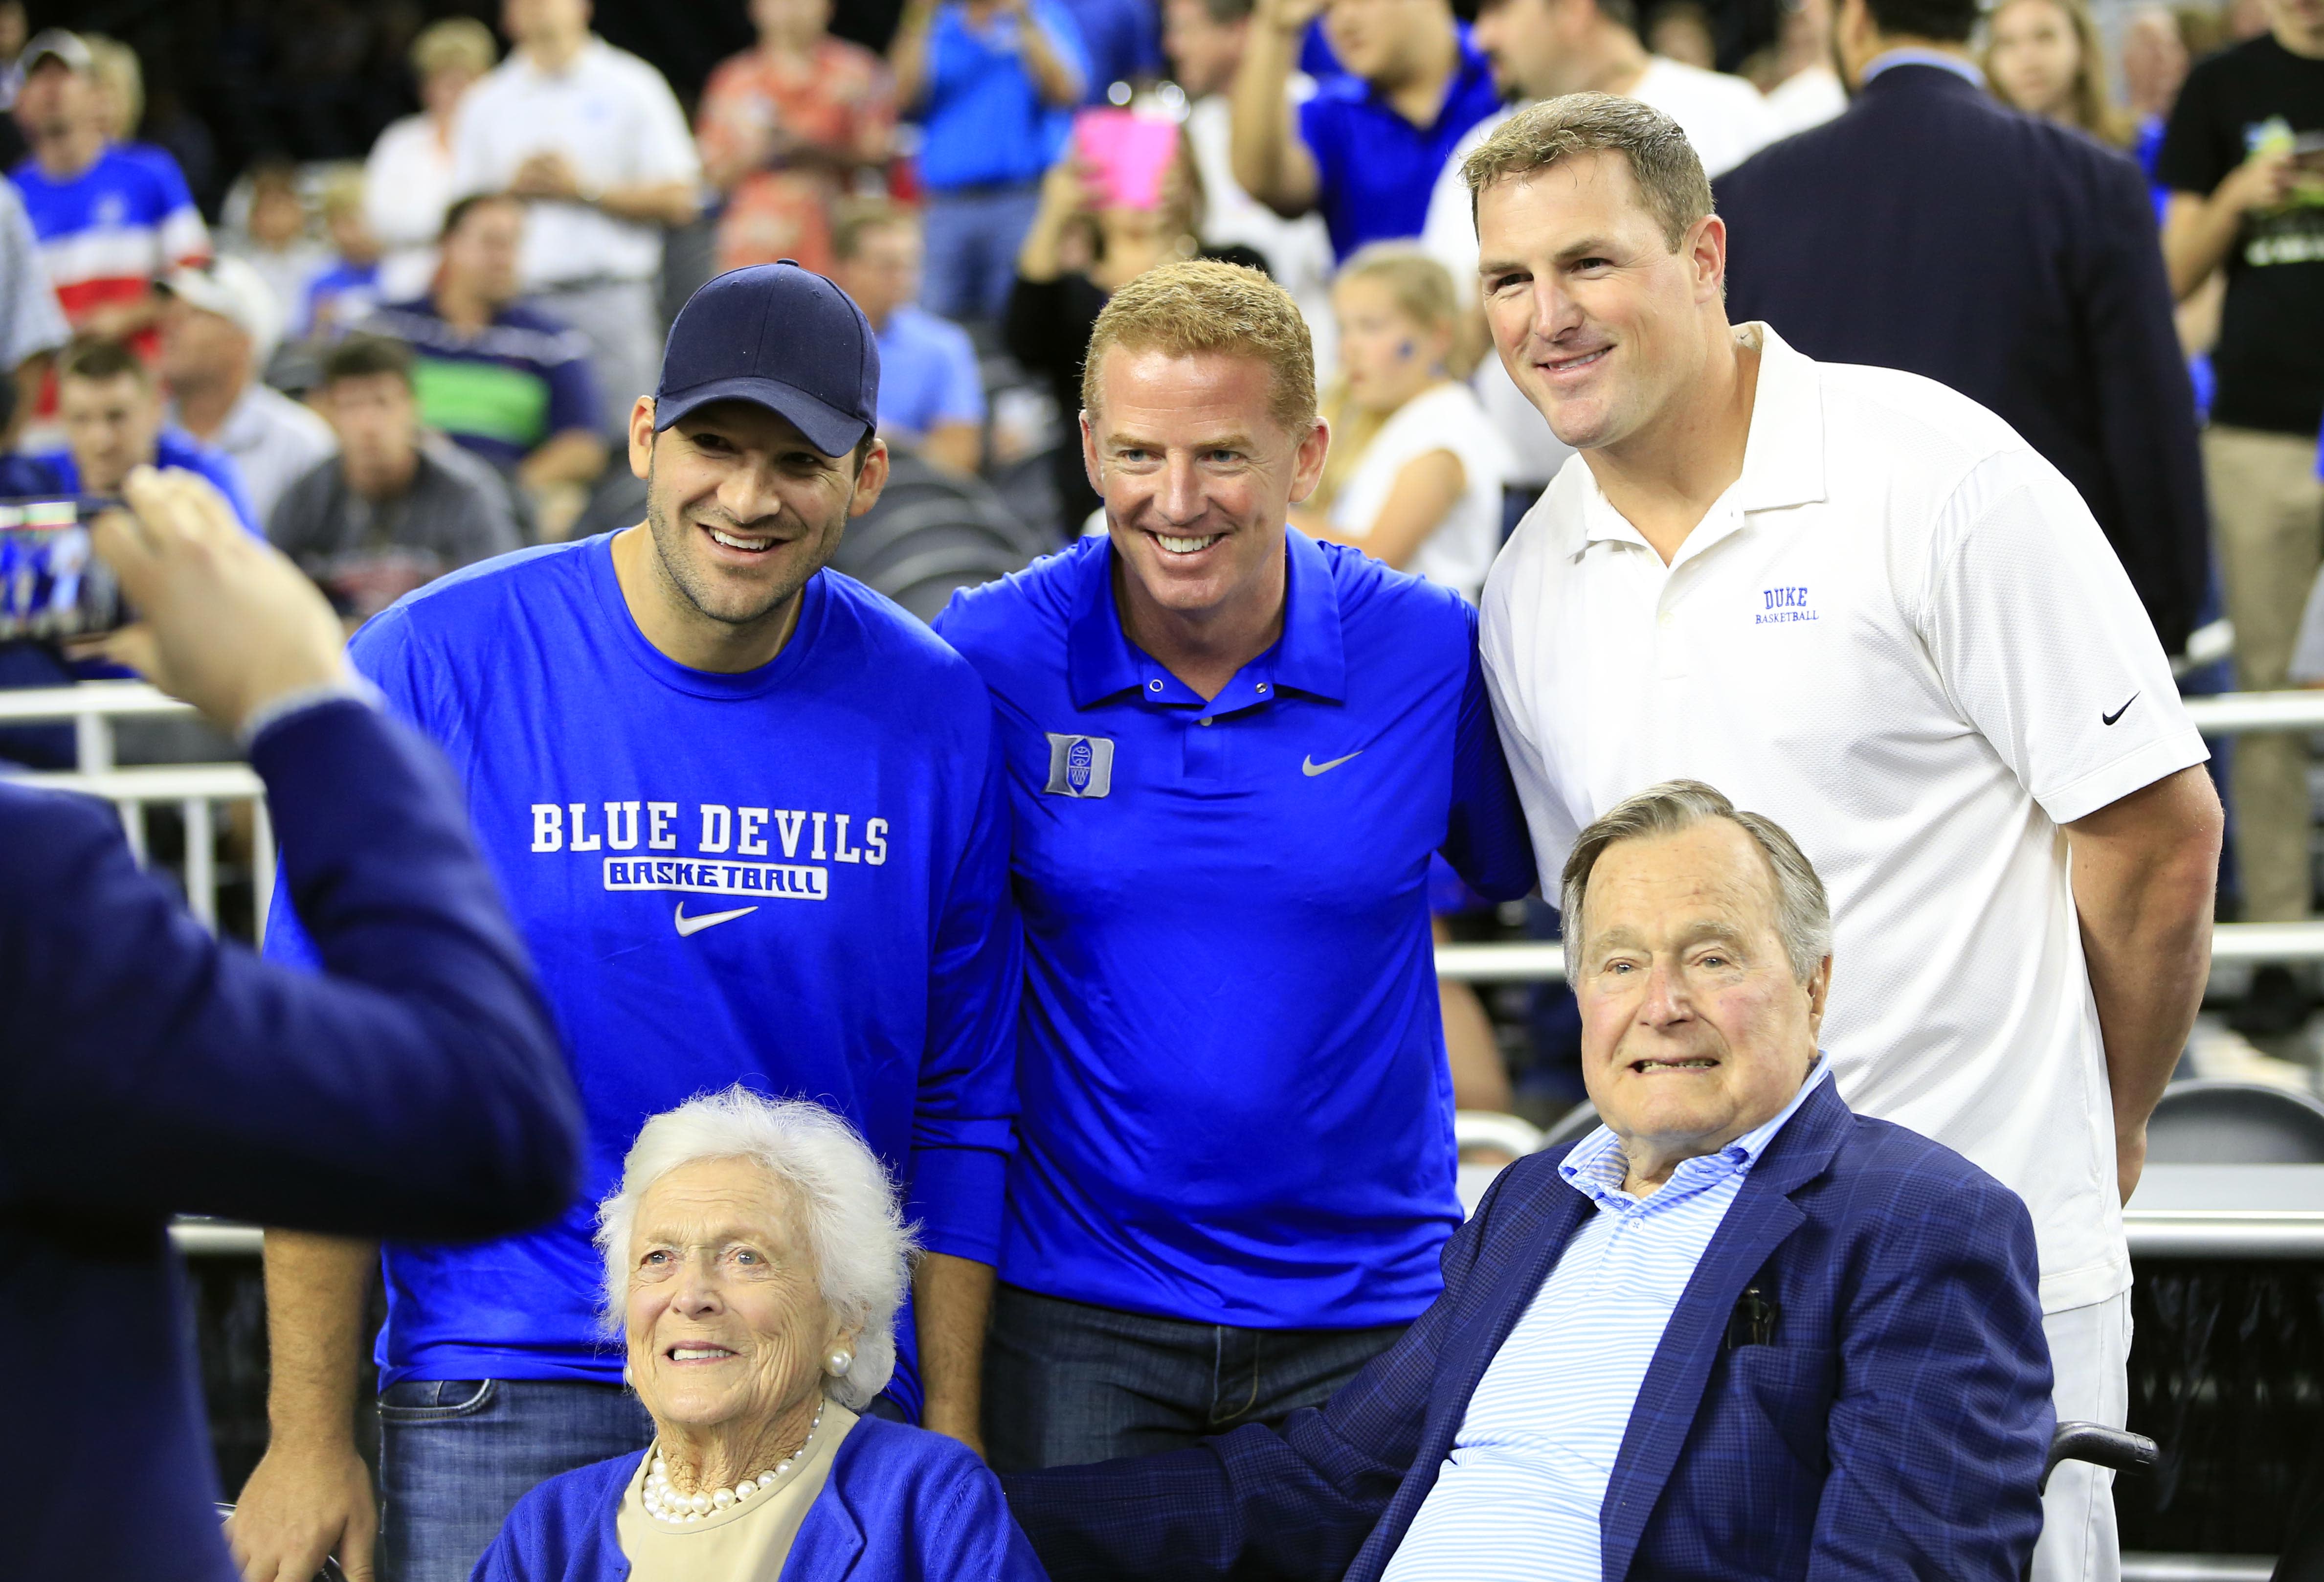 George H.W. Bush shows support for Duke in Houston